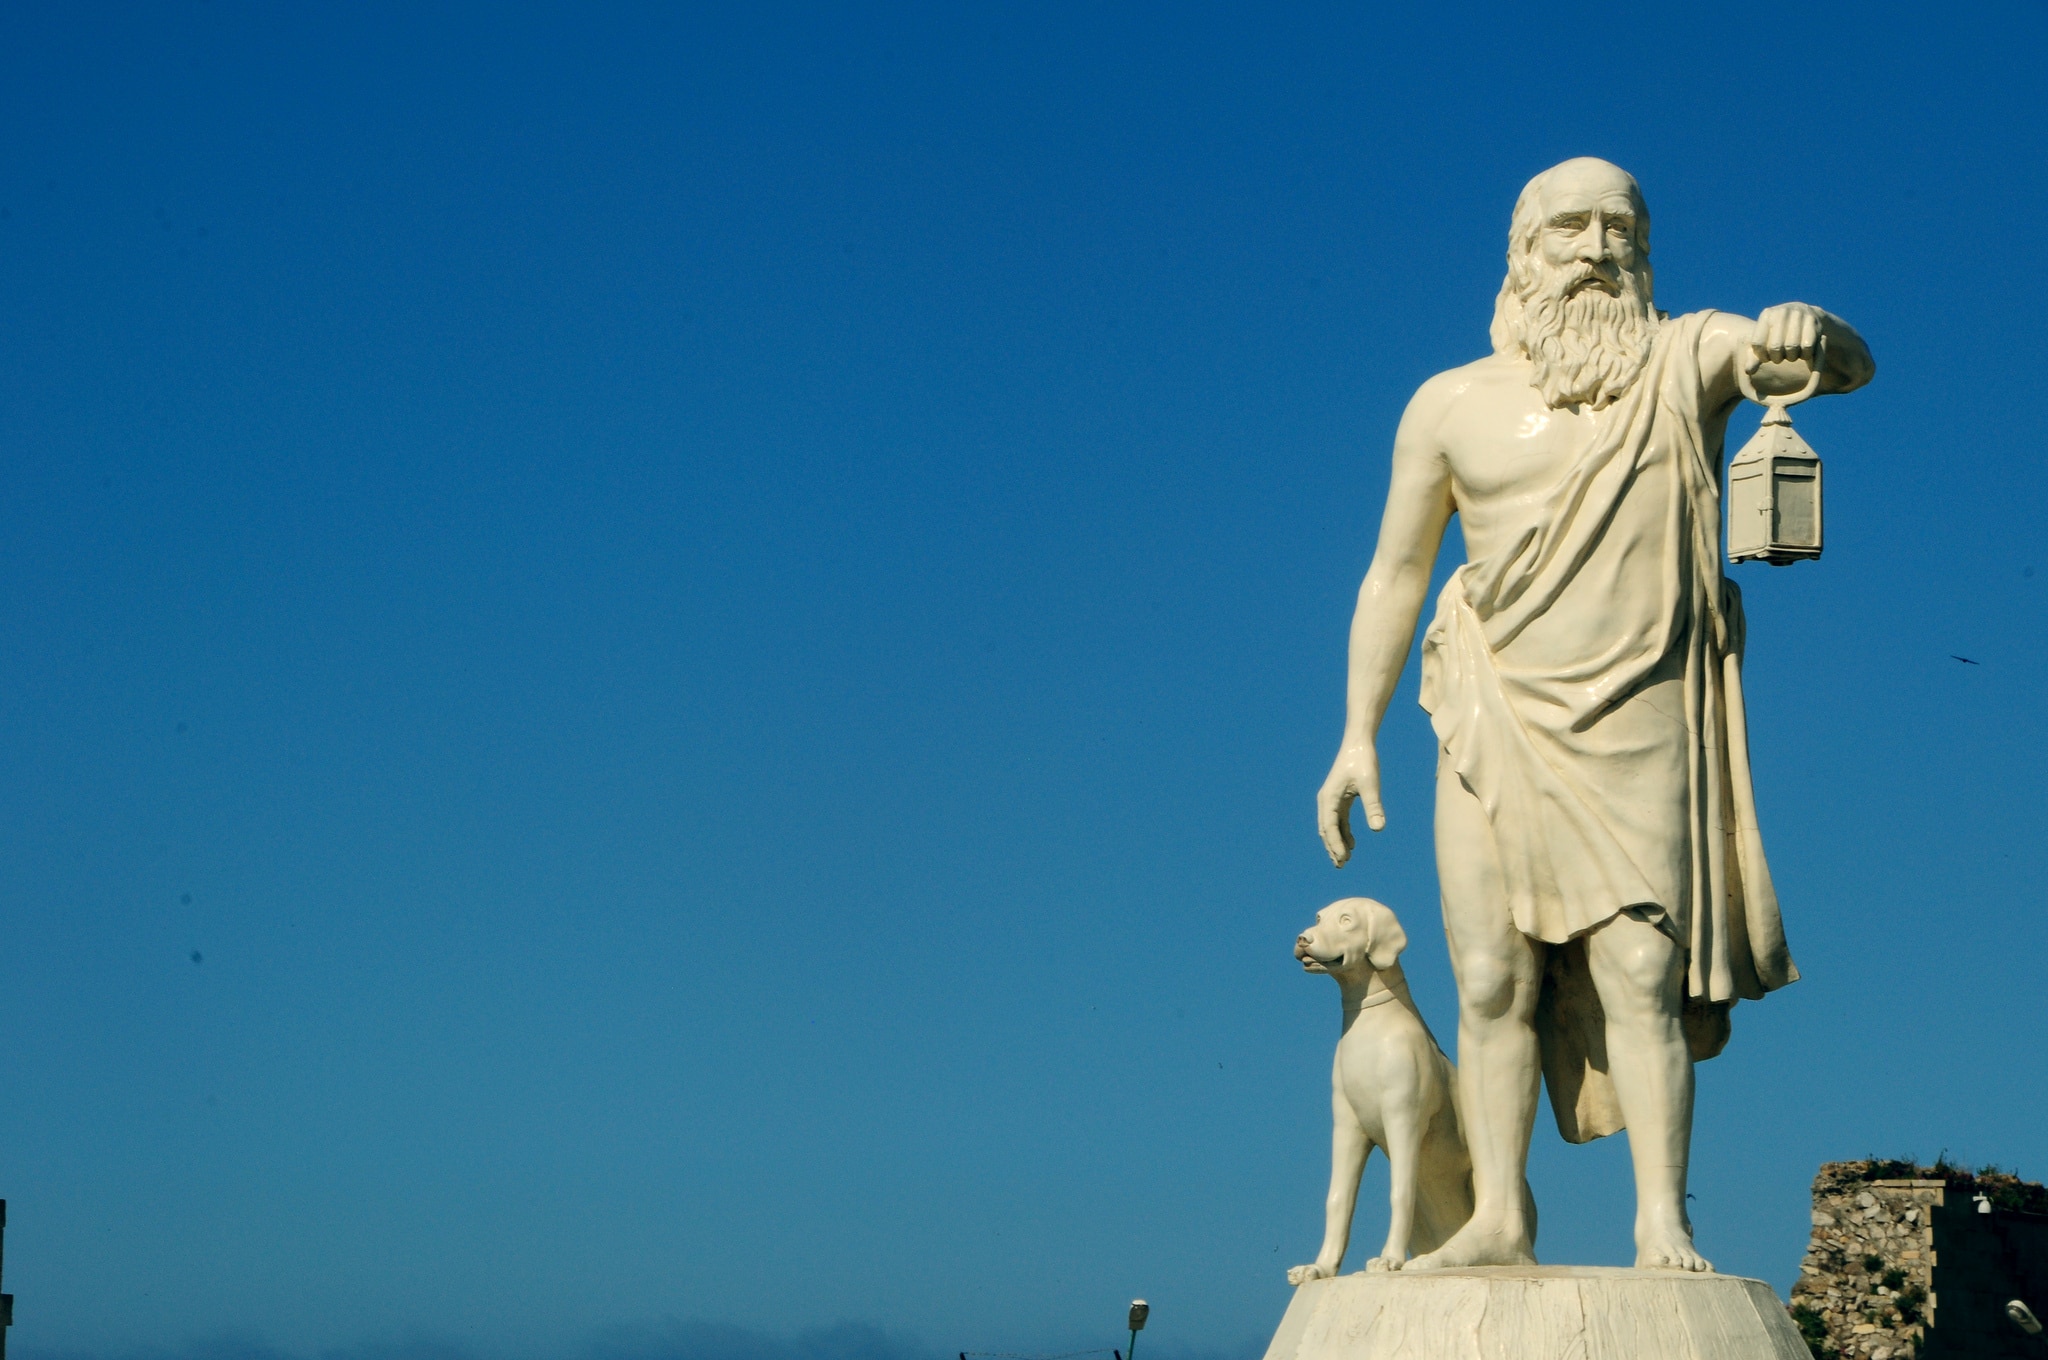 Diogenes with his lamp in Sinop